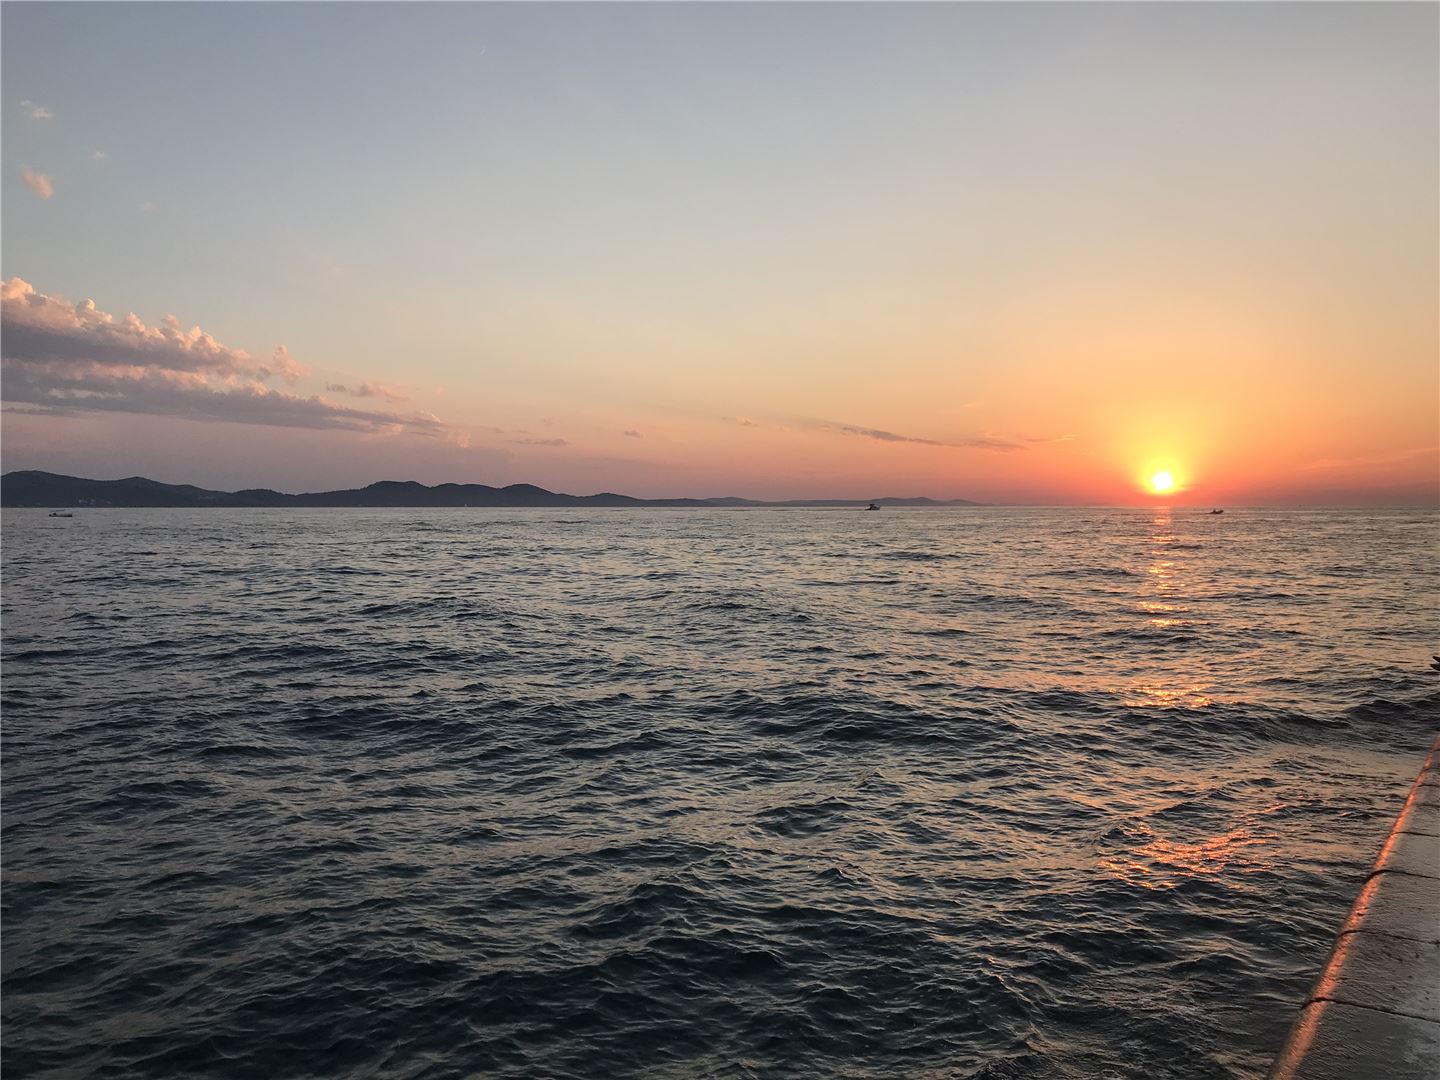 Alfred Hitchcock called Zadar’s sunset the most beautiful in the world